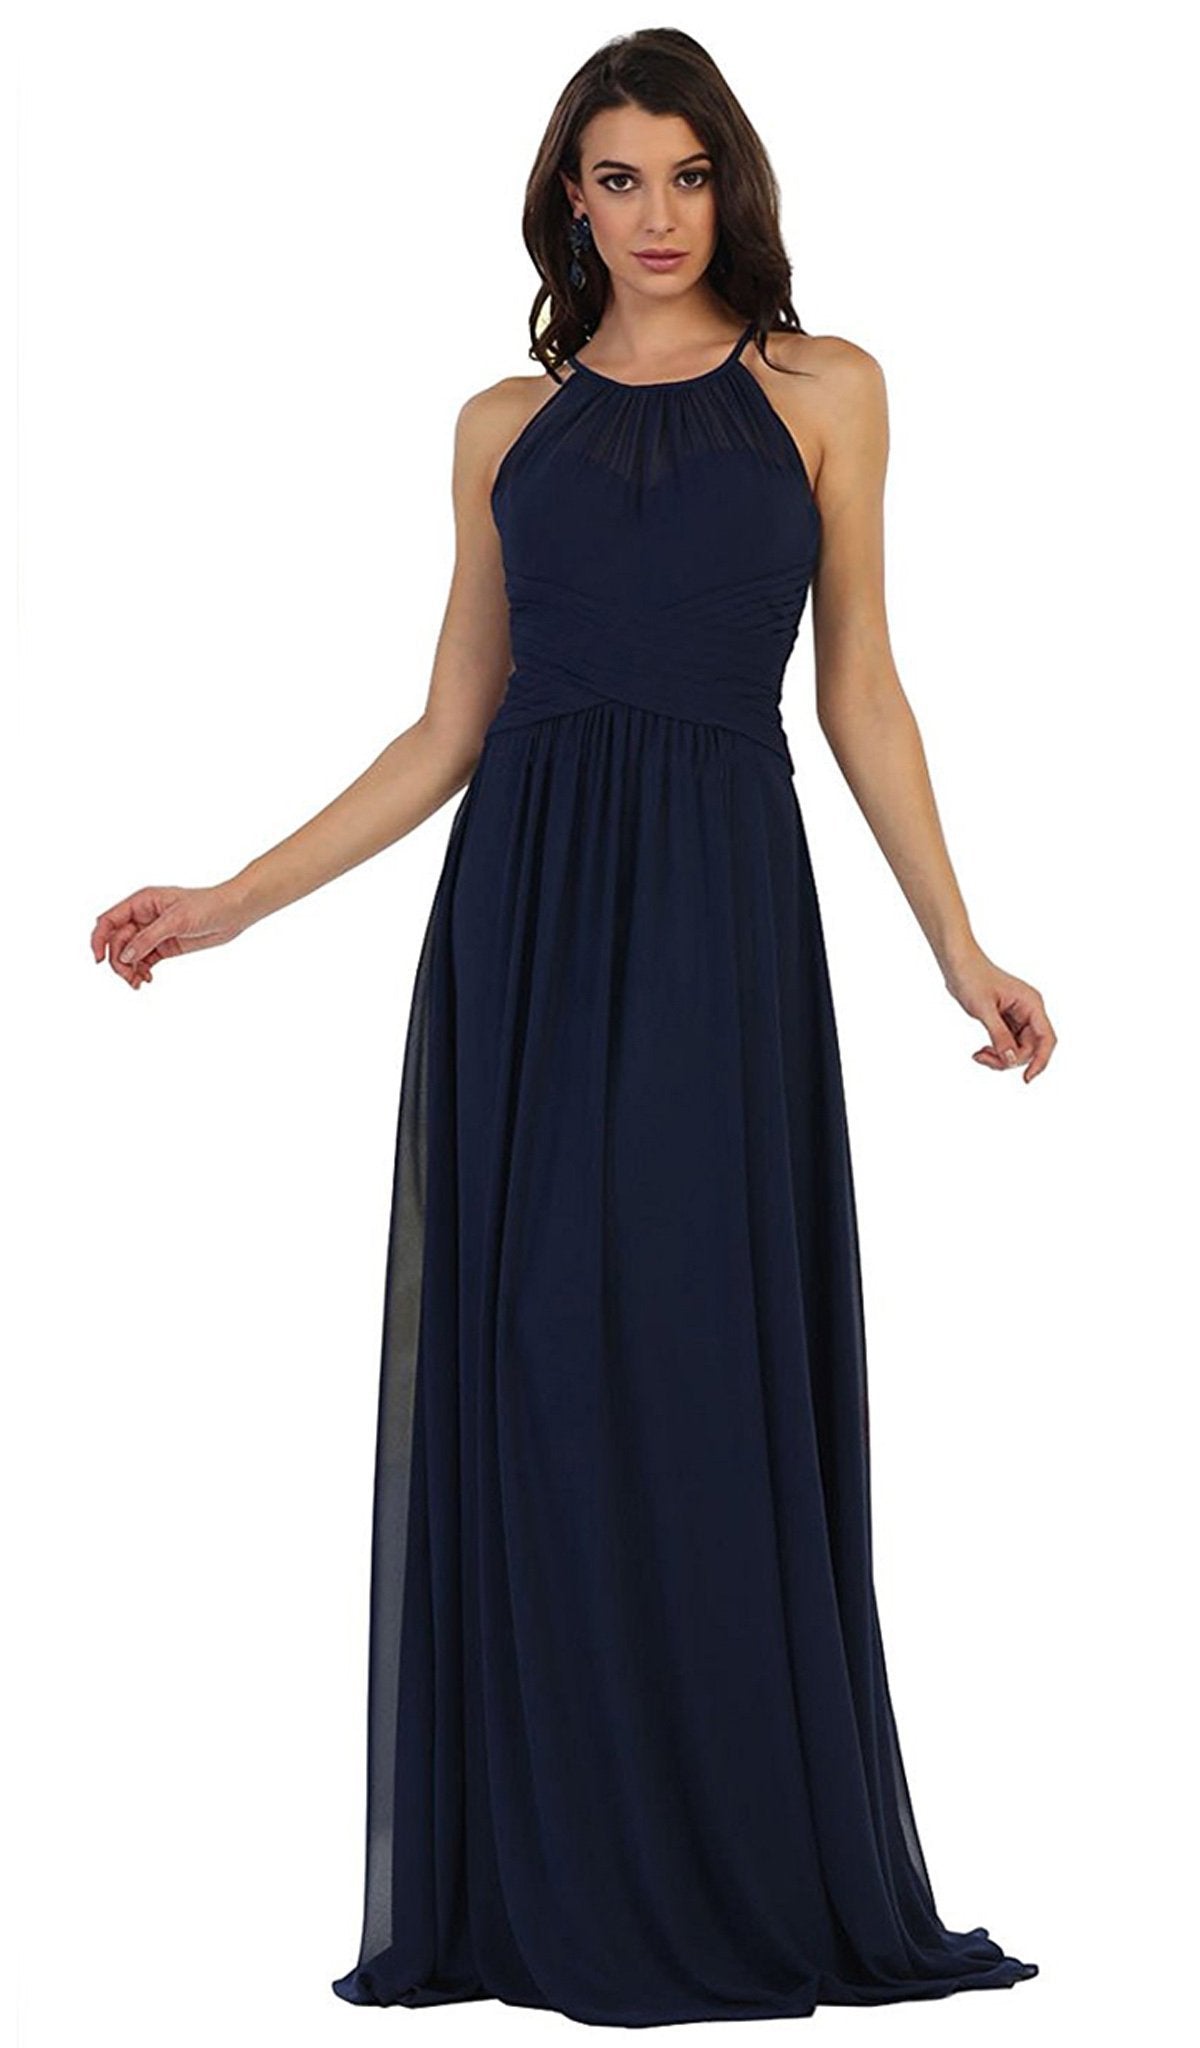 May Queen - Crisscross Ruched Fitted Bridesmaid Dress Special Occasion Dress 4 / Navy